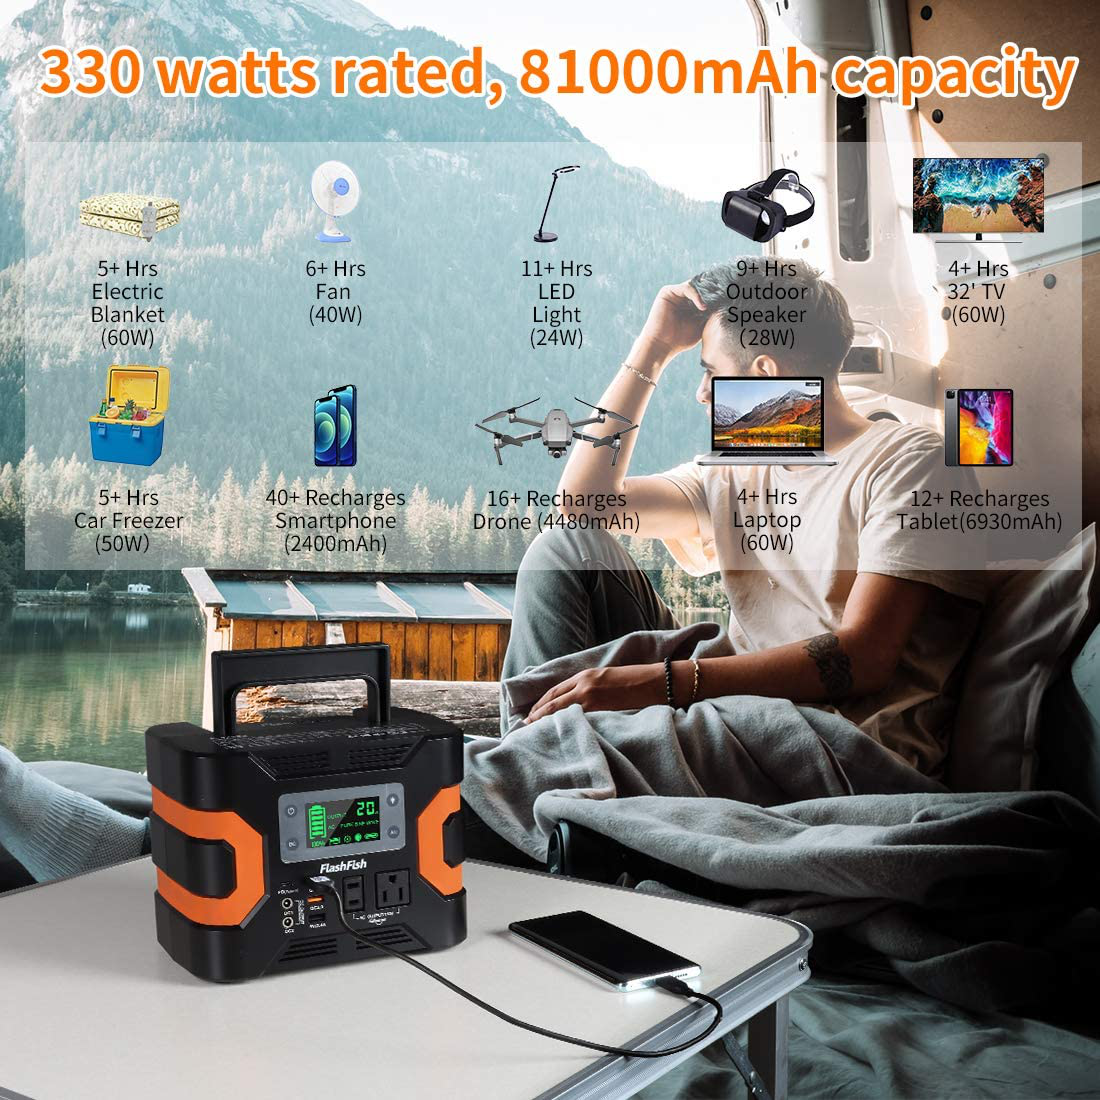 330W Portable Power Station, FF FLASHFISH 300Wh/81000mAh Solar Generator CPAP Battery Backup Power Emergency Power Supply With AC, 12V/24V DC, PD-Type-c, SOS Light For Camping Van/RV Trip Home